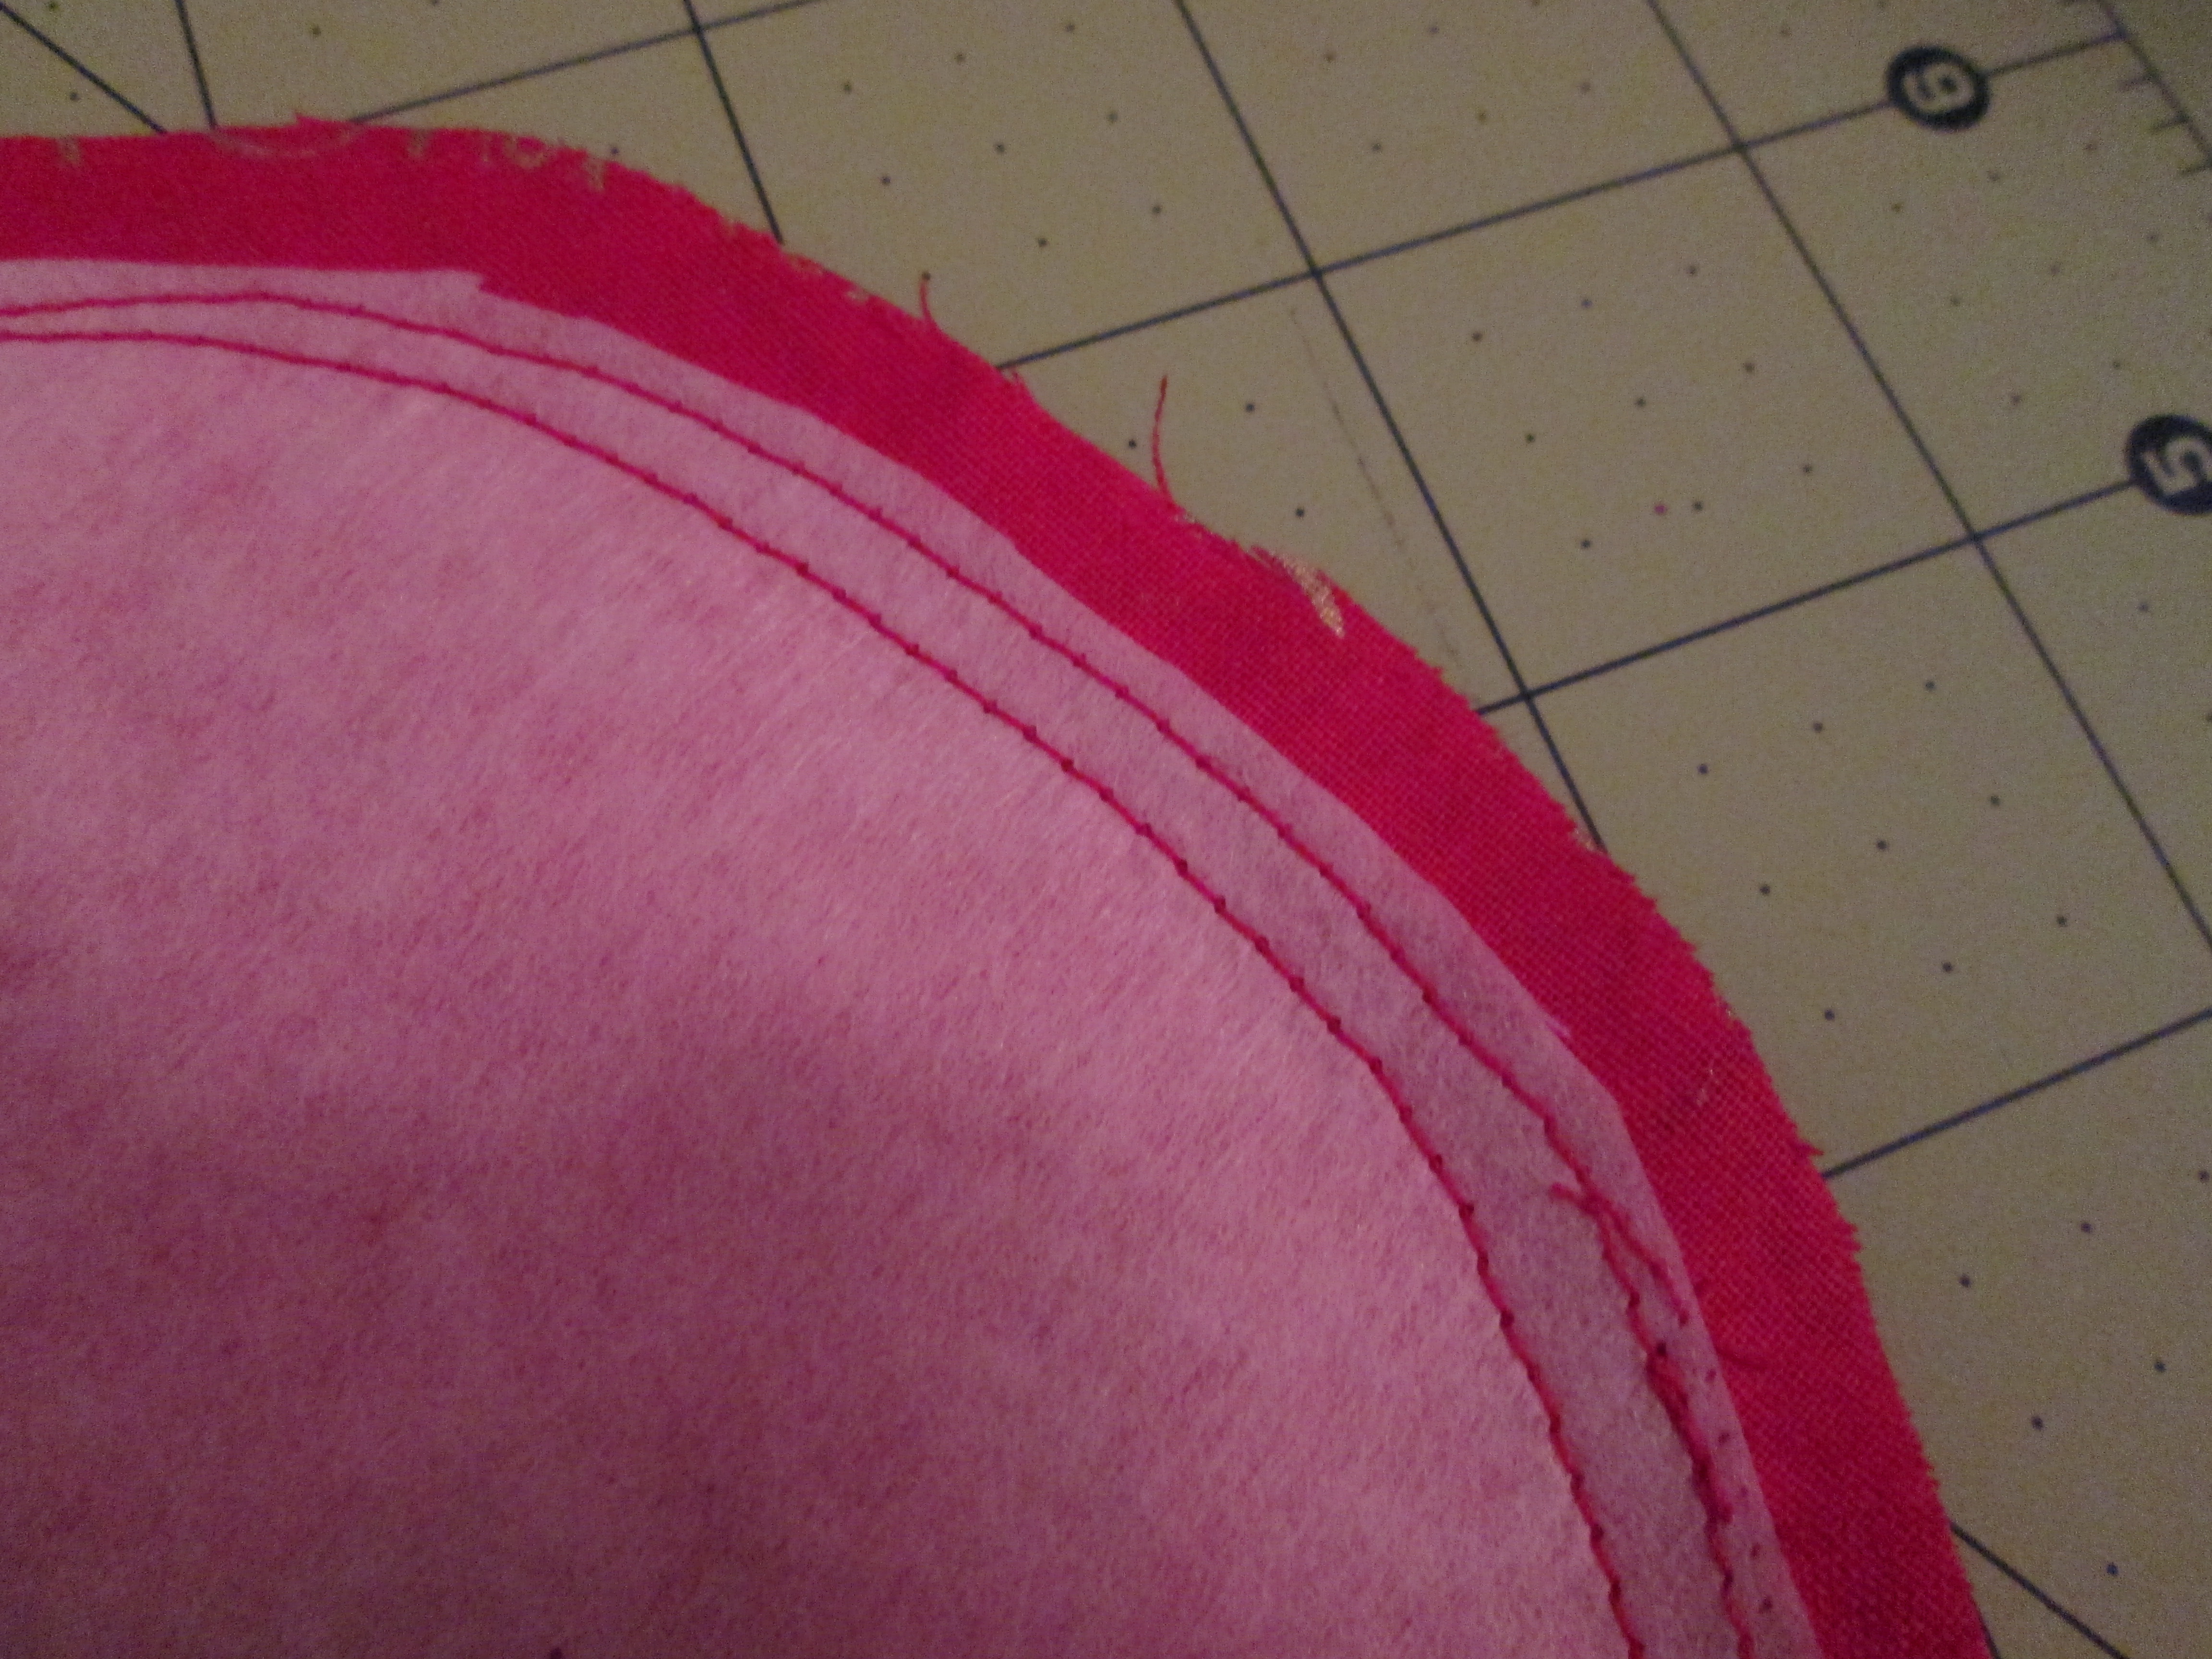 How to Attach Non-Fusible Interfacing